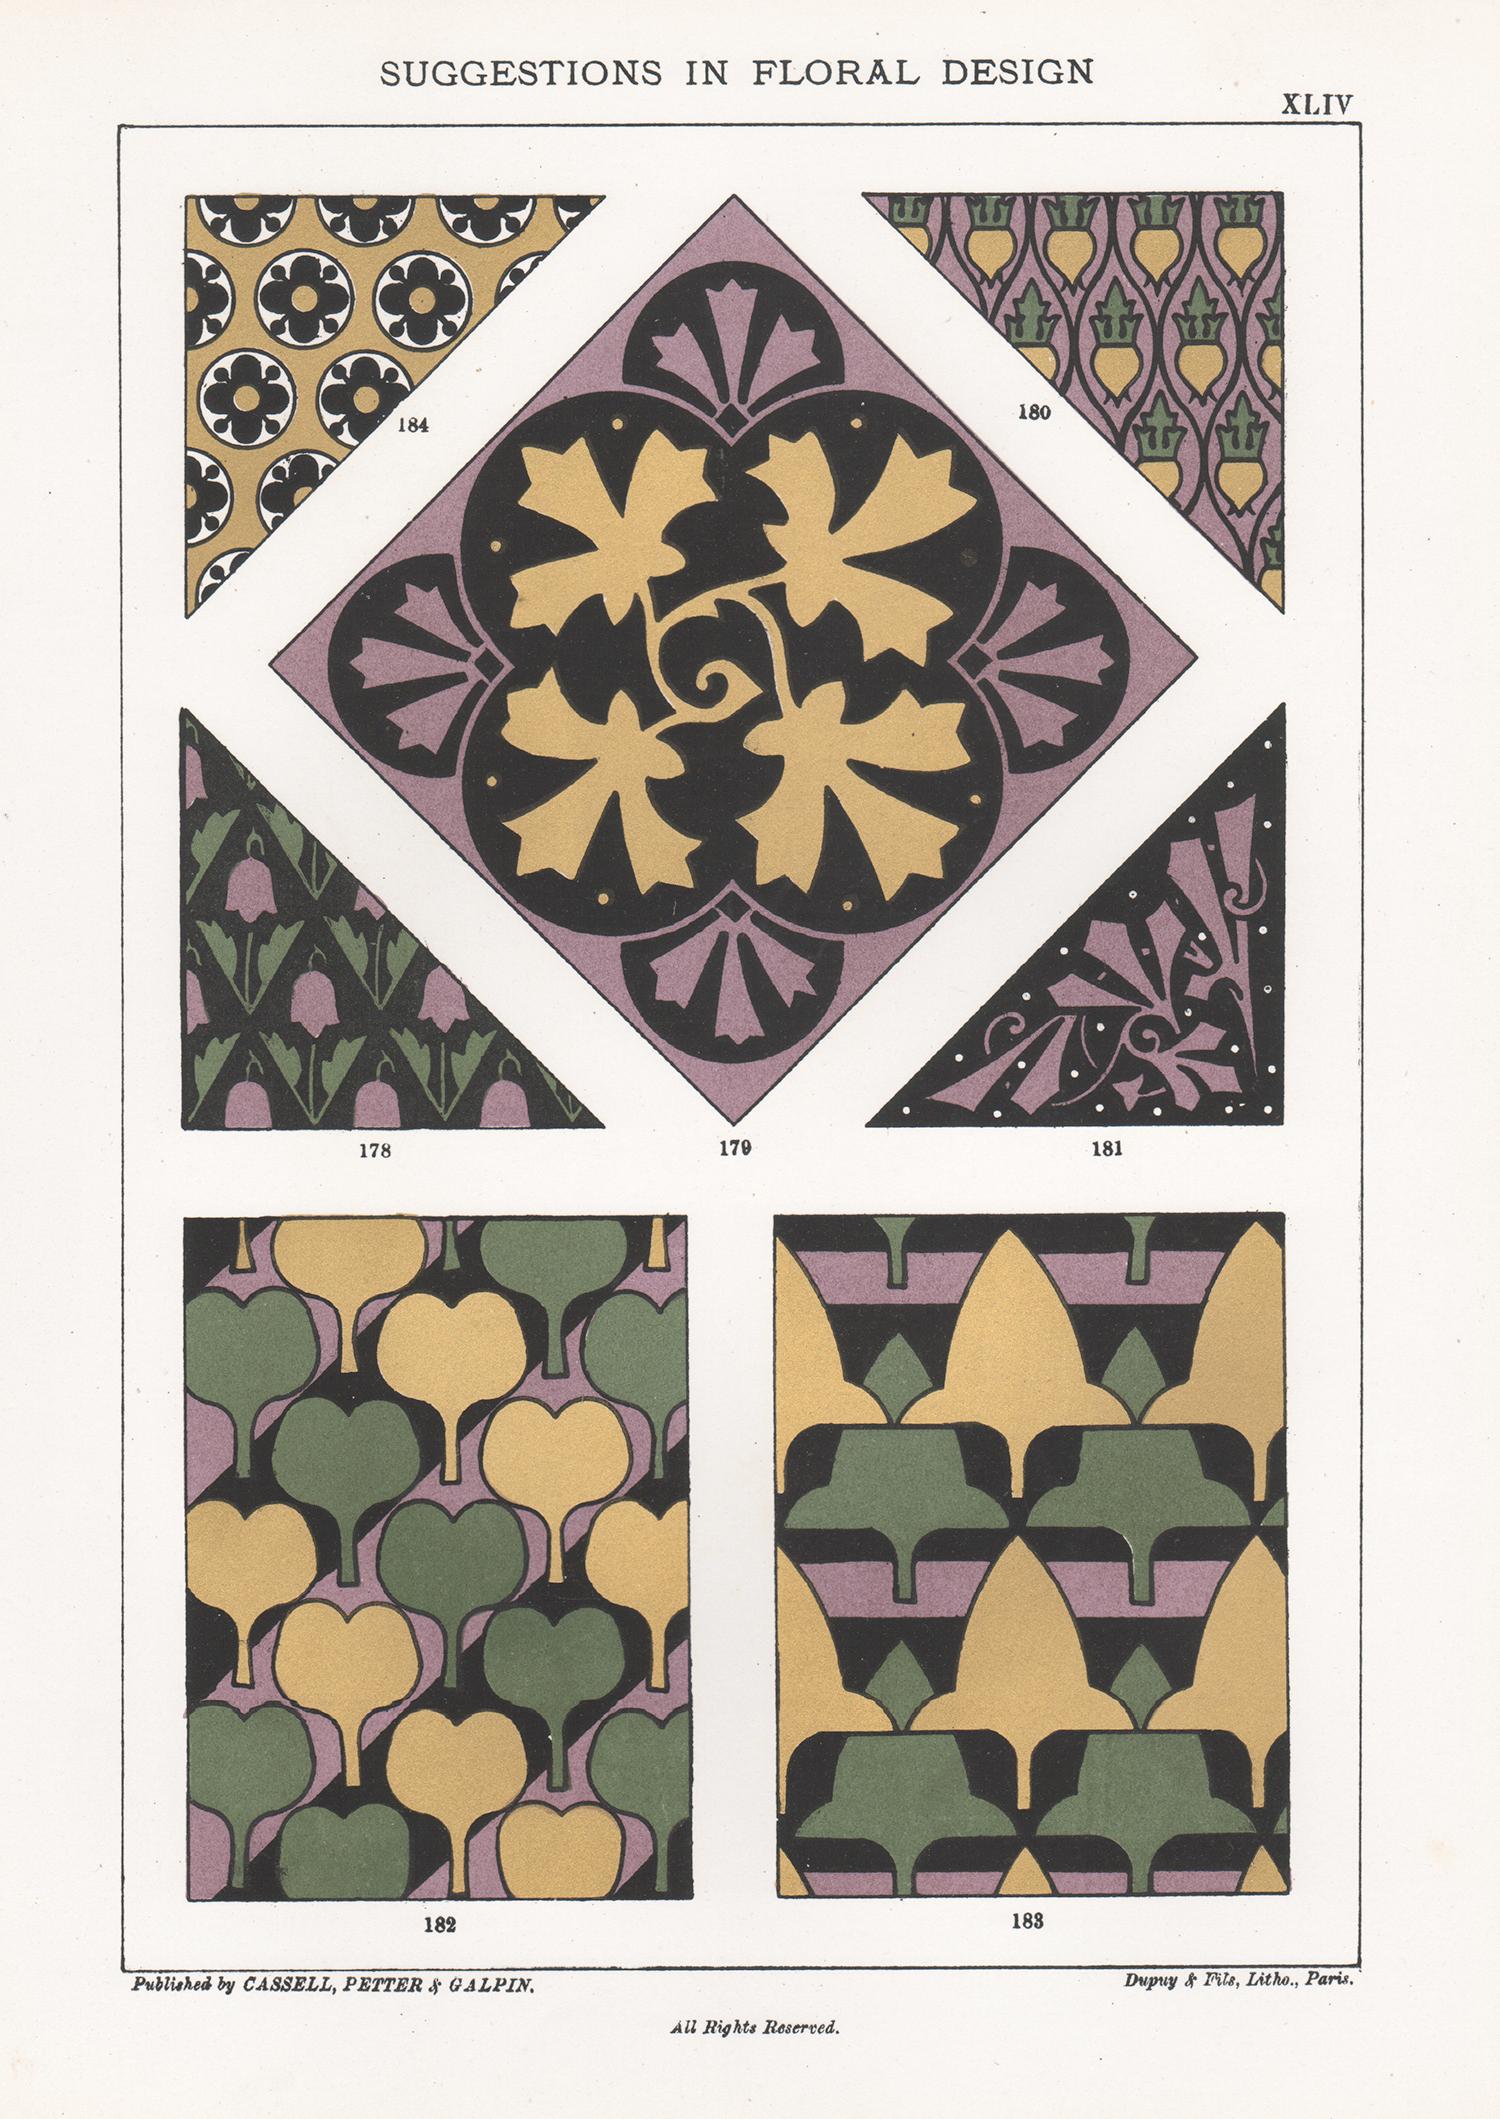 Frederick William Hulme Interior Print - Suggestions in Floral Design, Frederick Hulme, 19th century chromolithograph